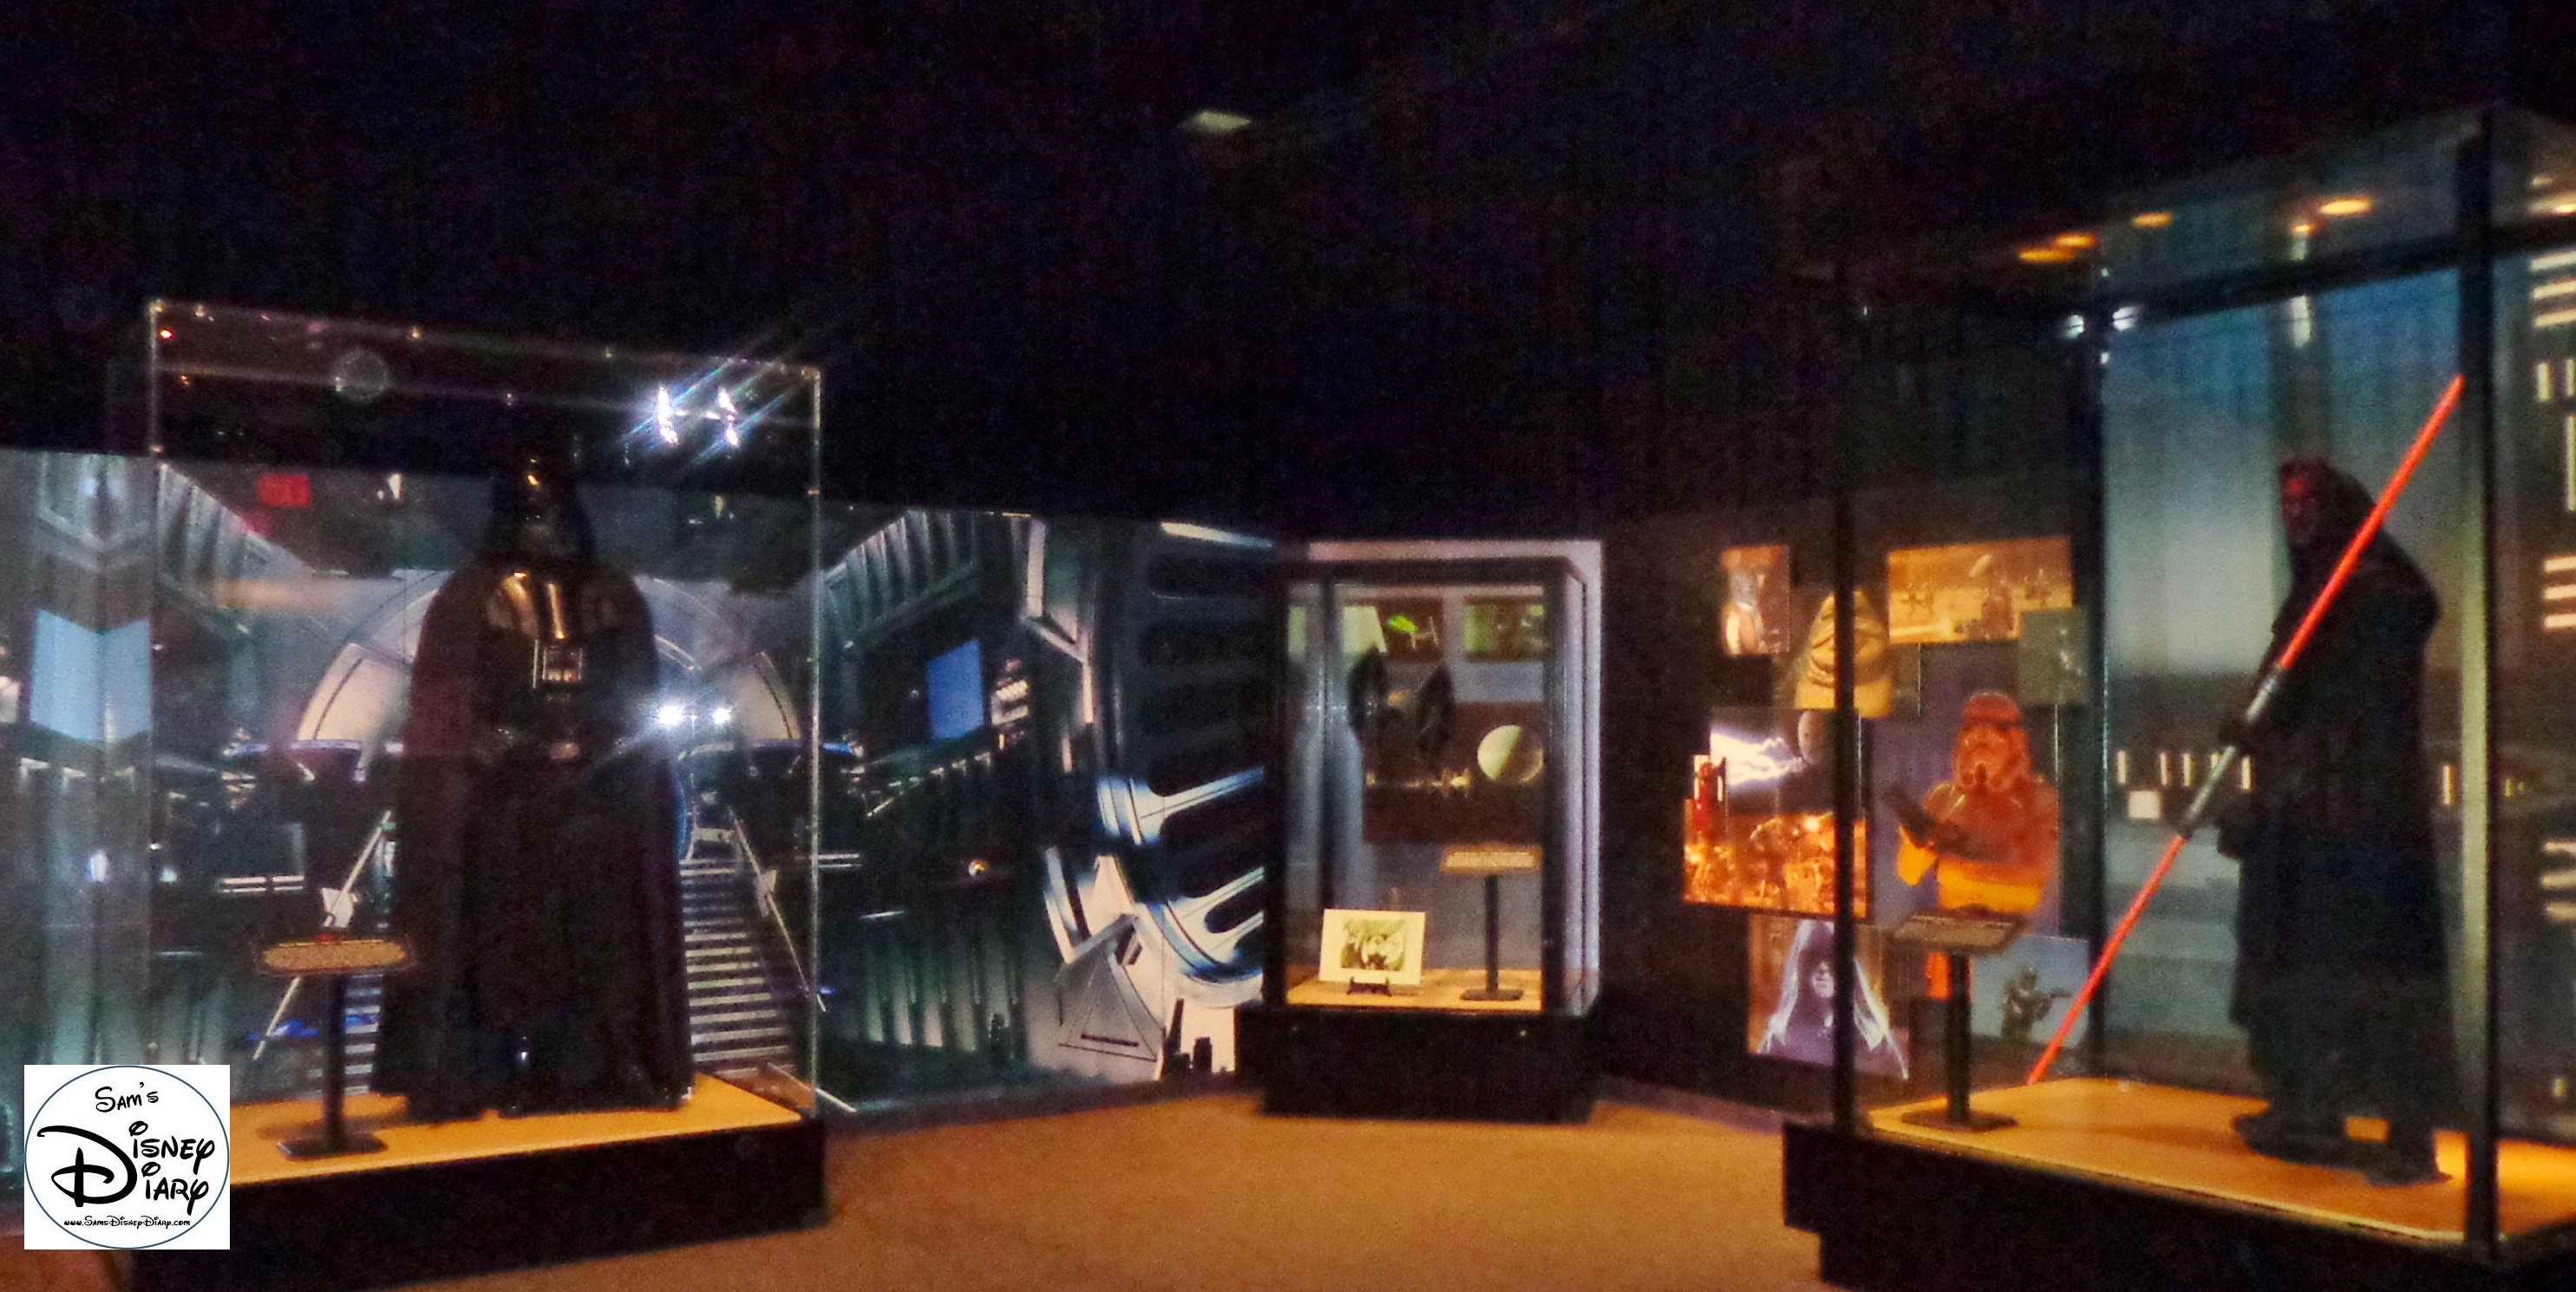 The American Film Institute Showcase featured an ever changing exhibit of move props and costumes.